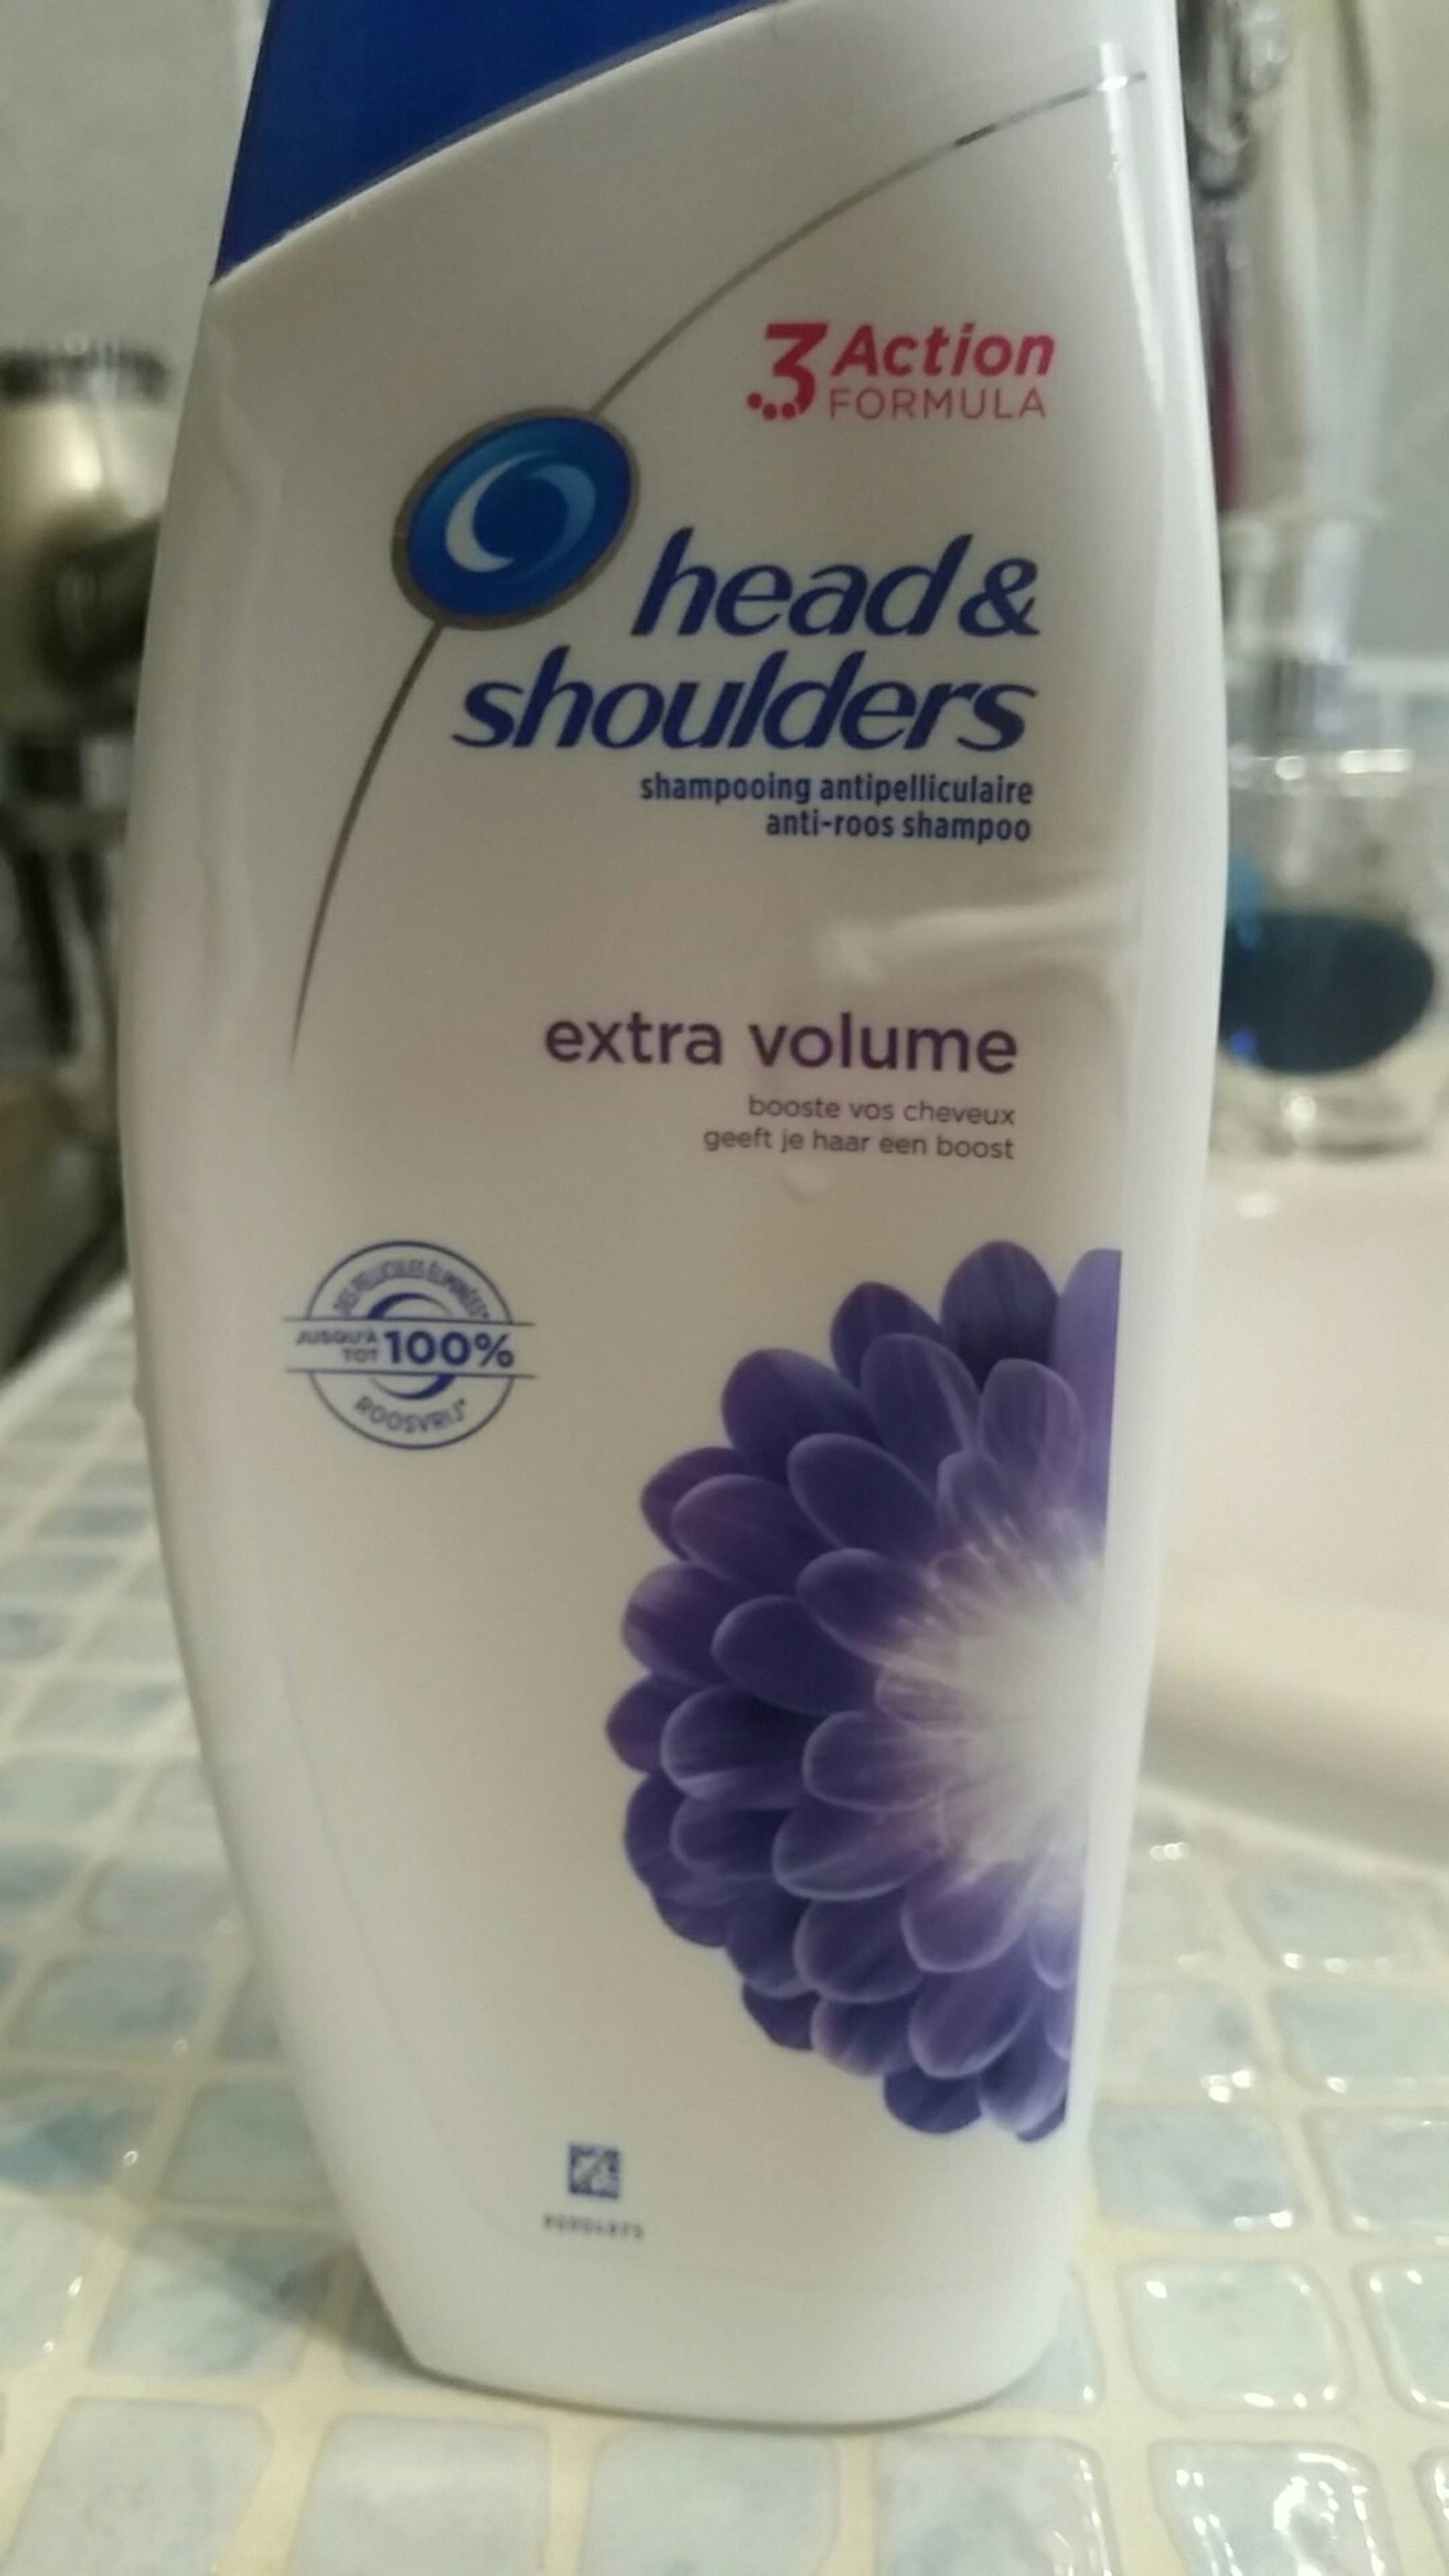 HEAD & SHOULDERS - Extra volume - Shampooing antipelliculaire